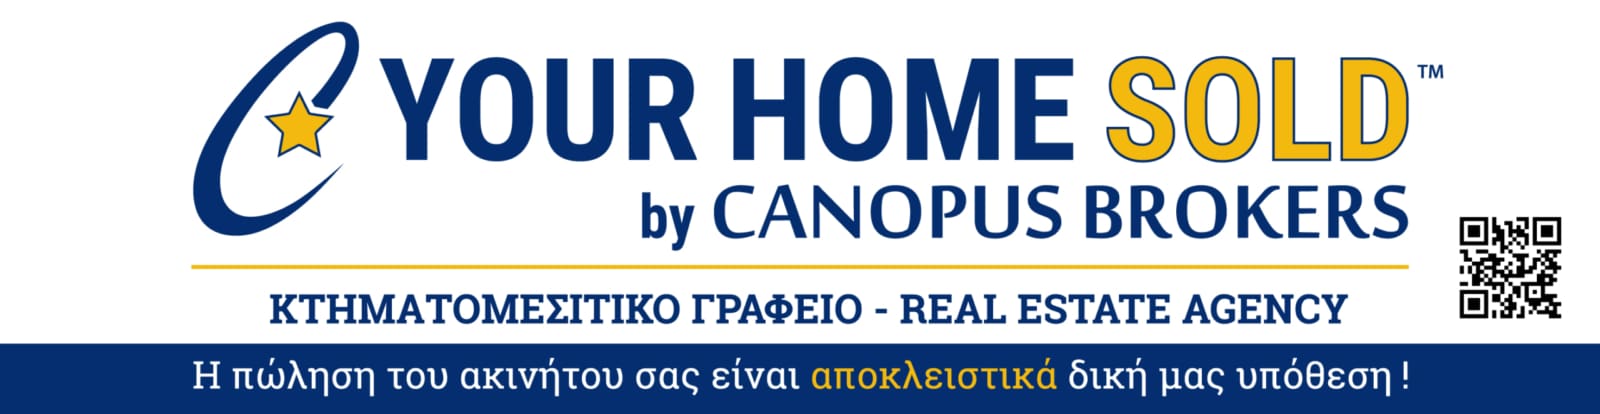 YOUR HOME SOLD by Canopus Brokers